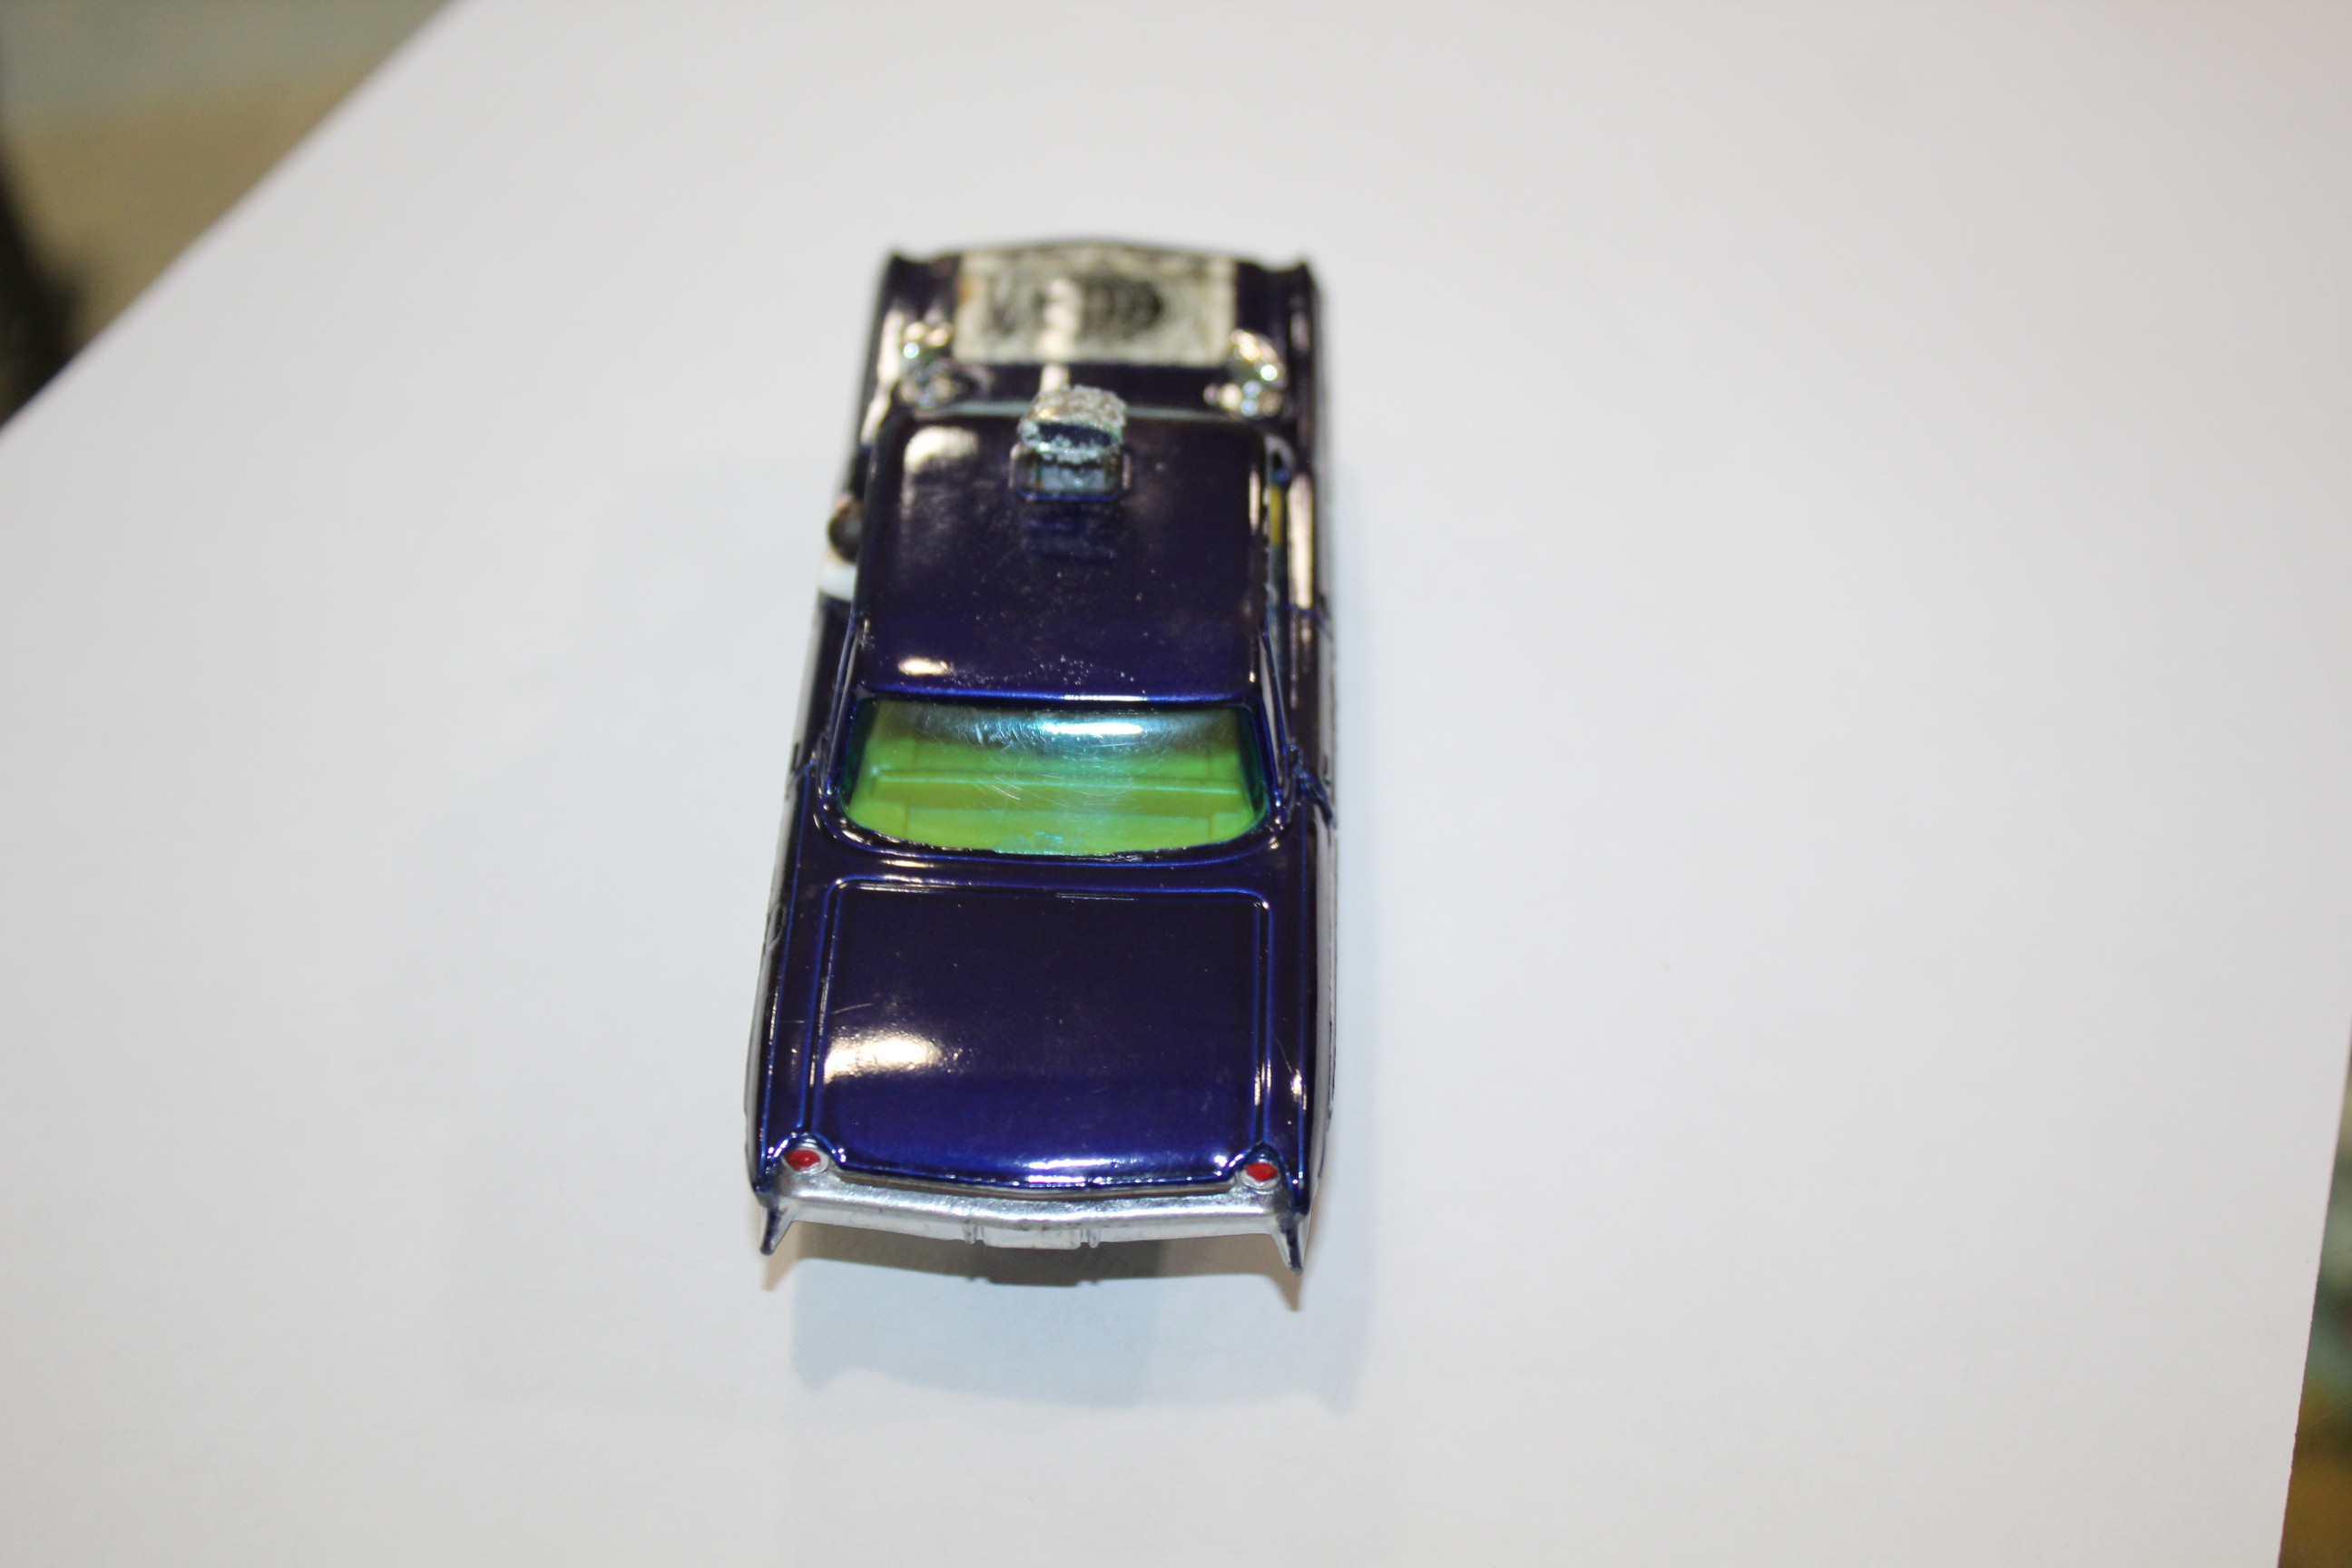 CORGI MAN FROM UNCLE THRUSH BUSTER Model No 497, the car with a purple body and 2 figures, and - Image 11 of 12